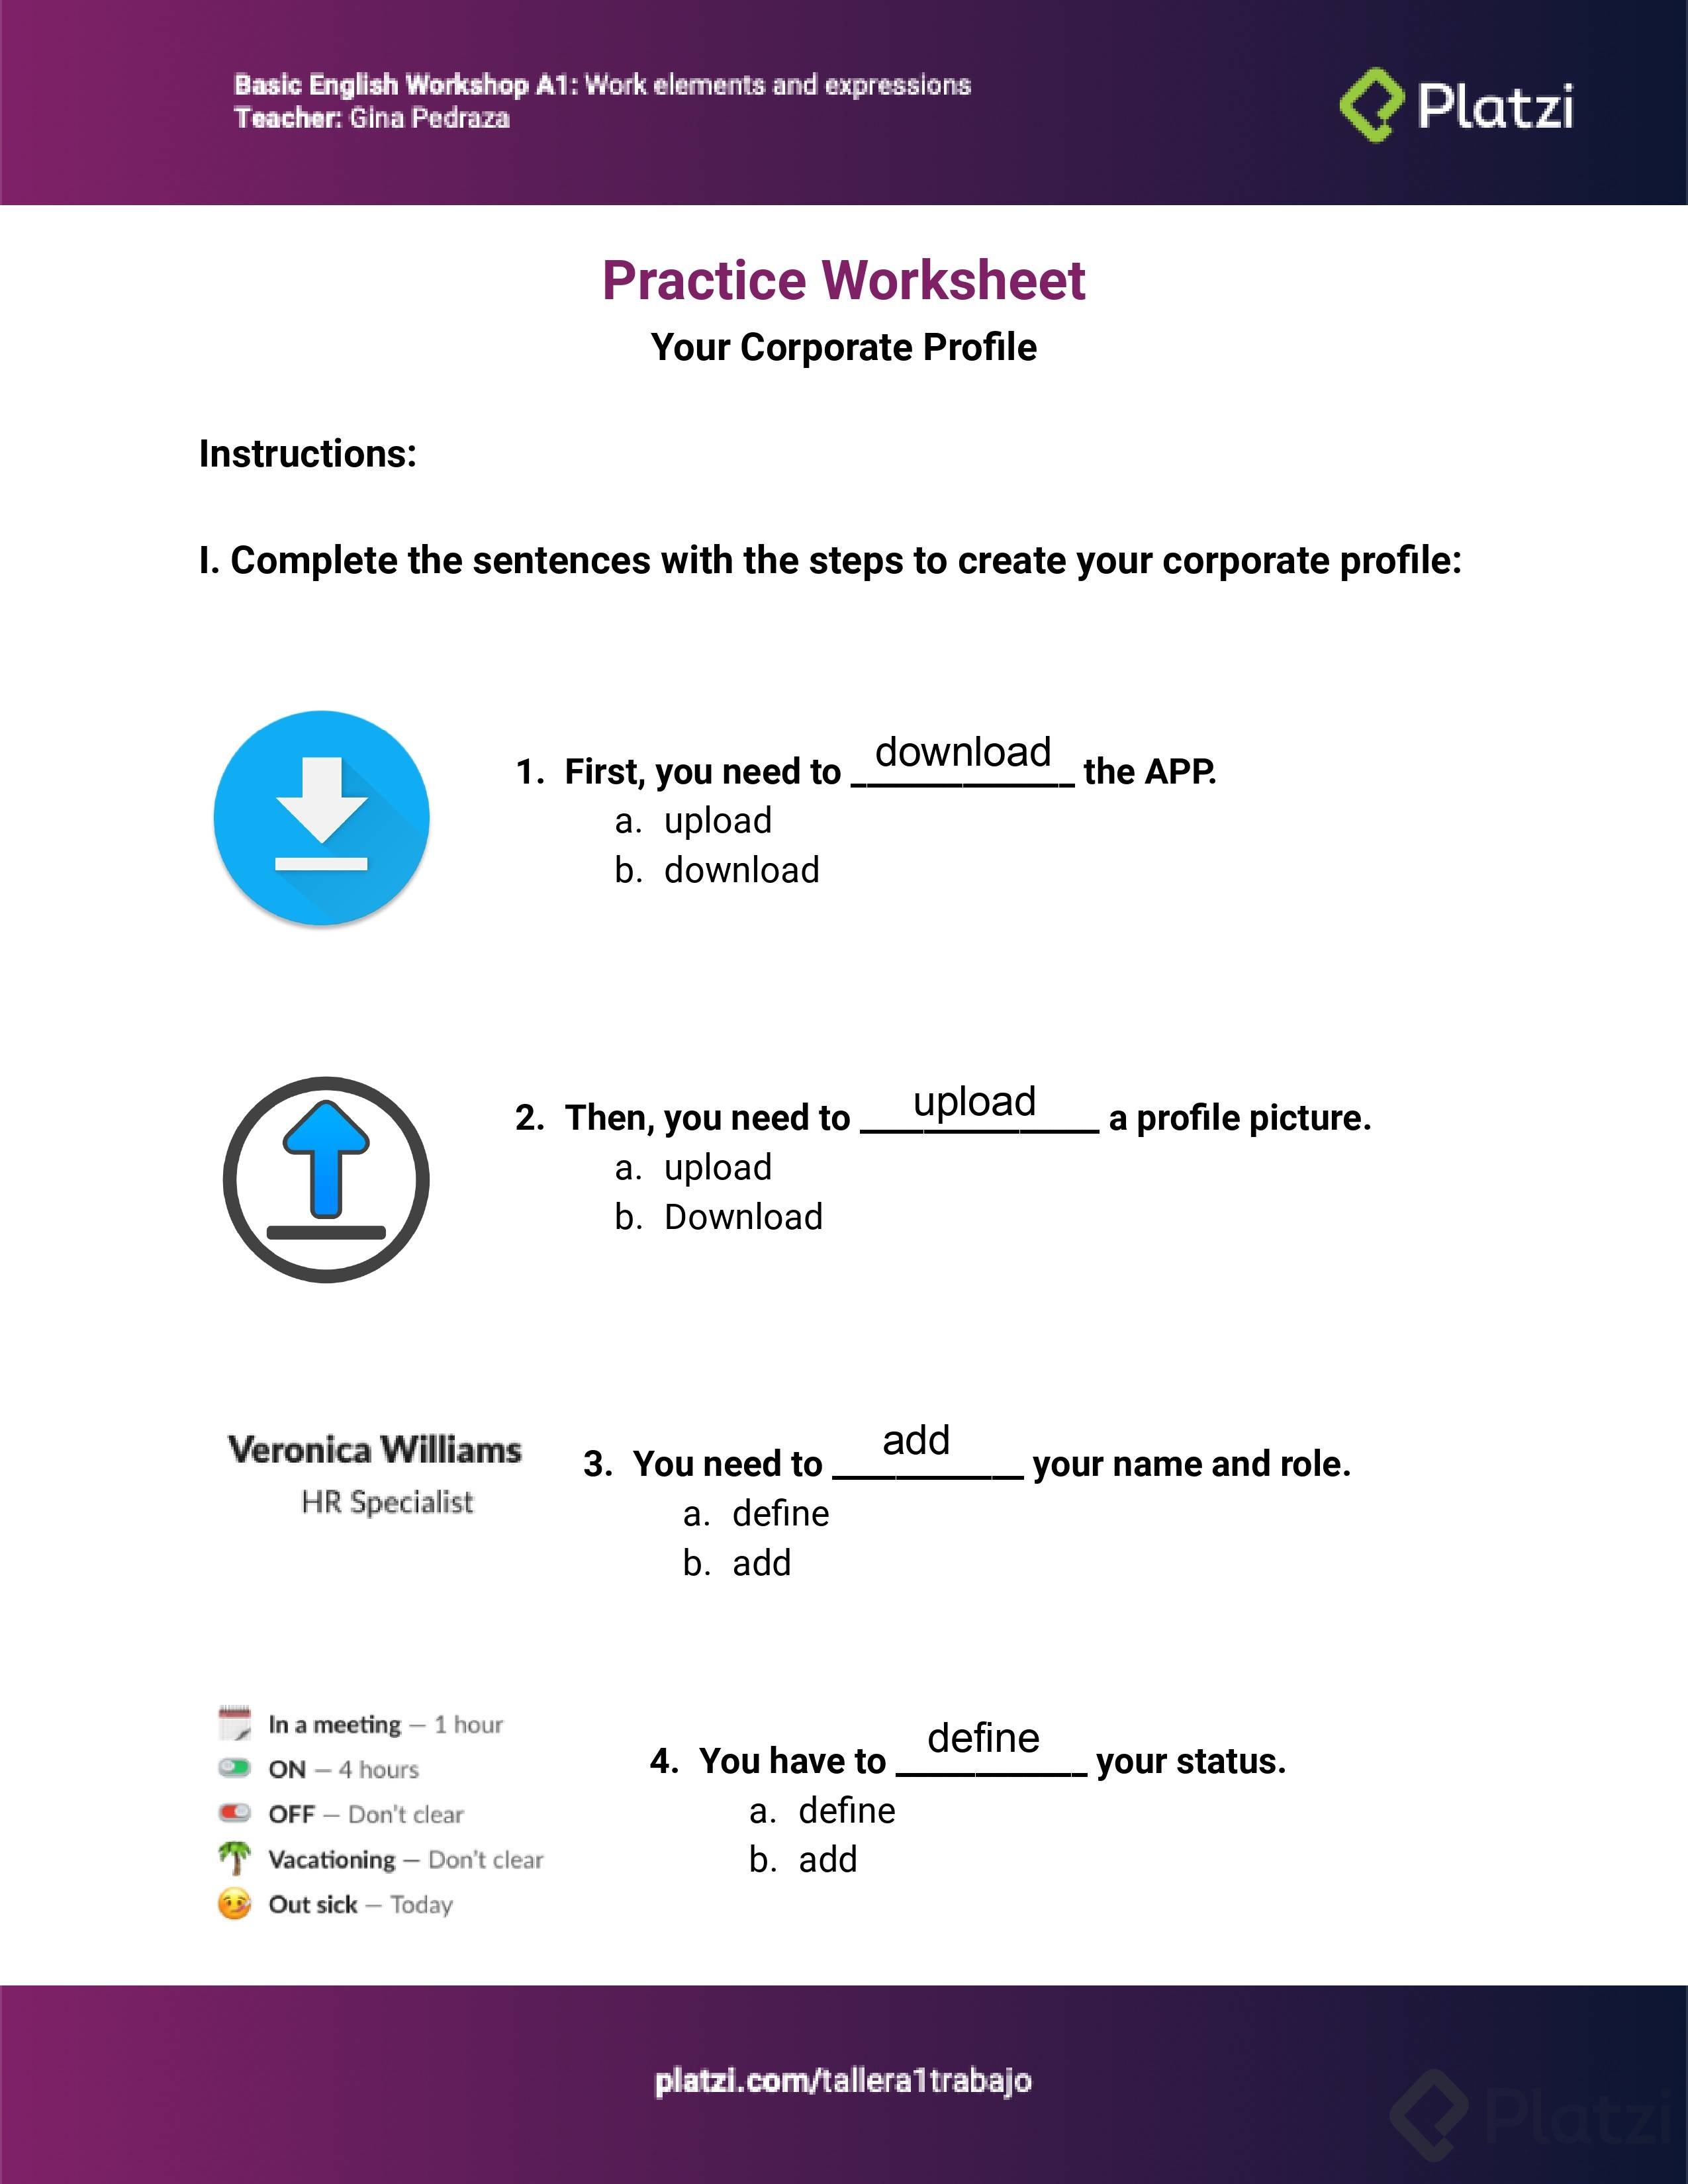 worksheet-class-3-before-you-get-started_3db20706-c981-4711-8a66-ee3faabd0697_pages-to-jpg-0001.png